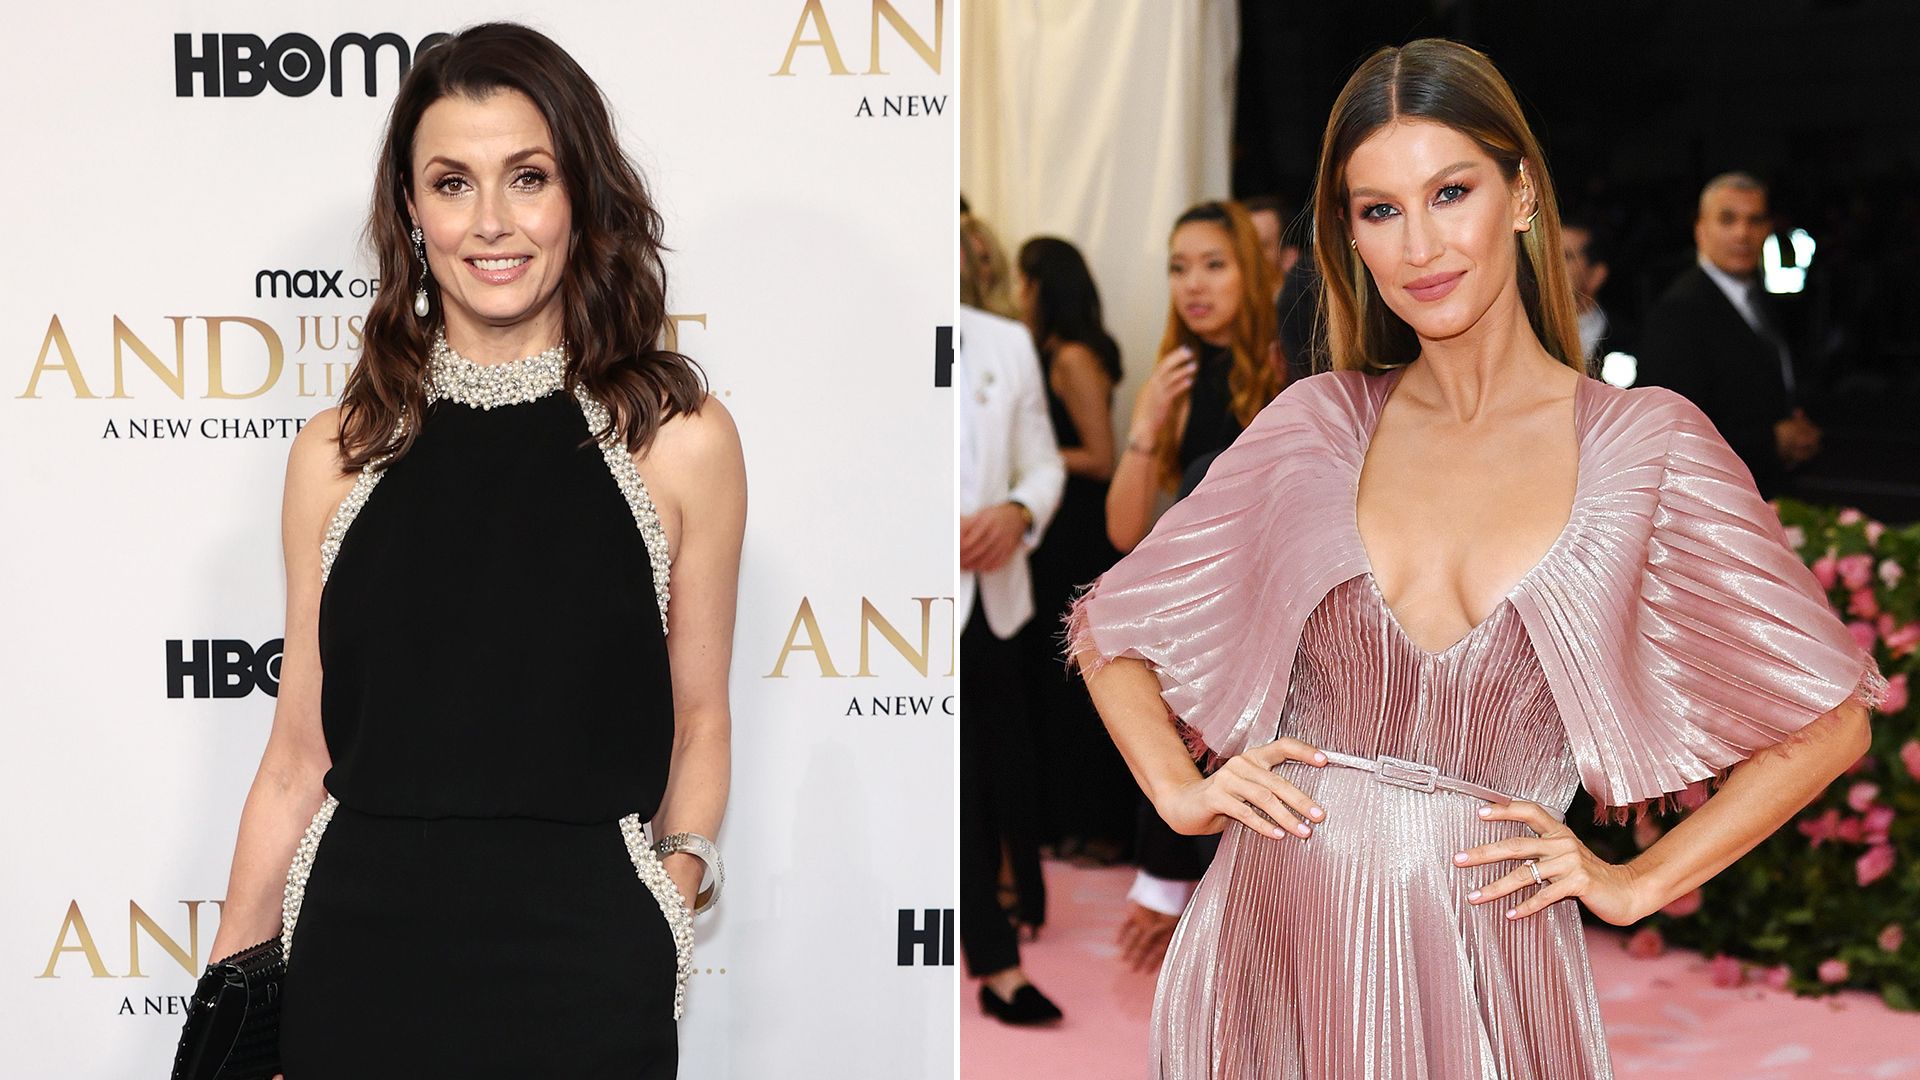 Blue Bloods' Bridget Moynahan gives Gisele a run for her money in throwback modeling photos